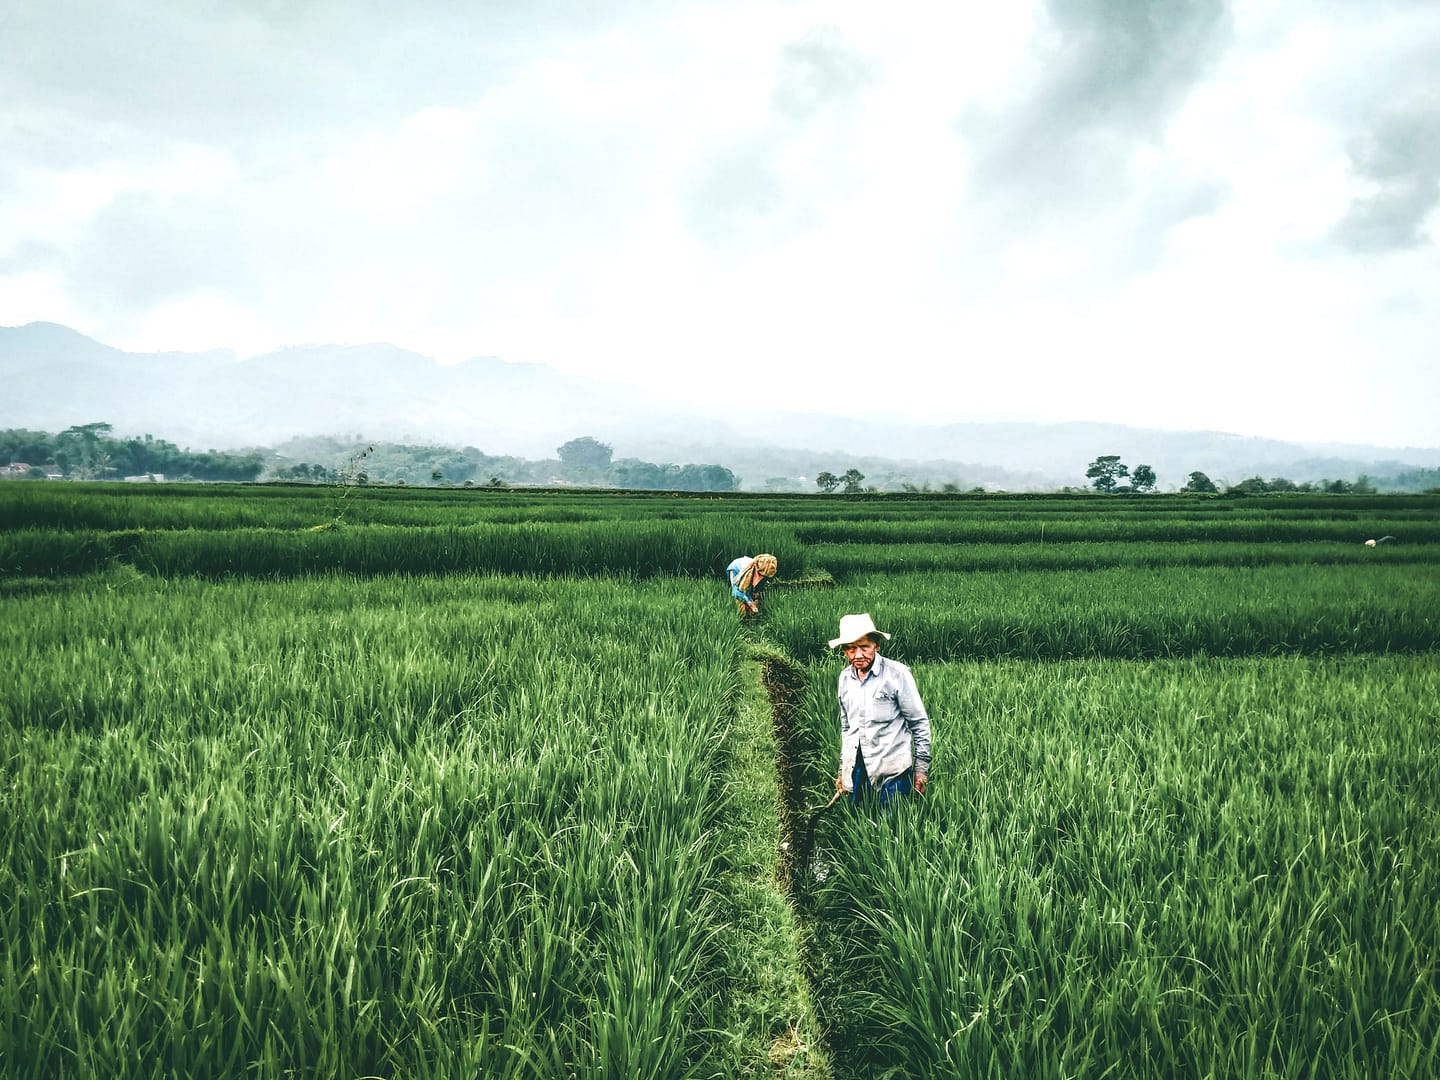 Green rice fields with blue and cloudy sky. Two people are in the field cutting the rice.